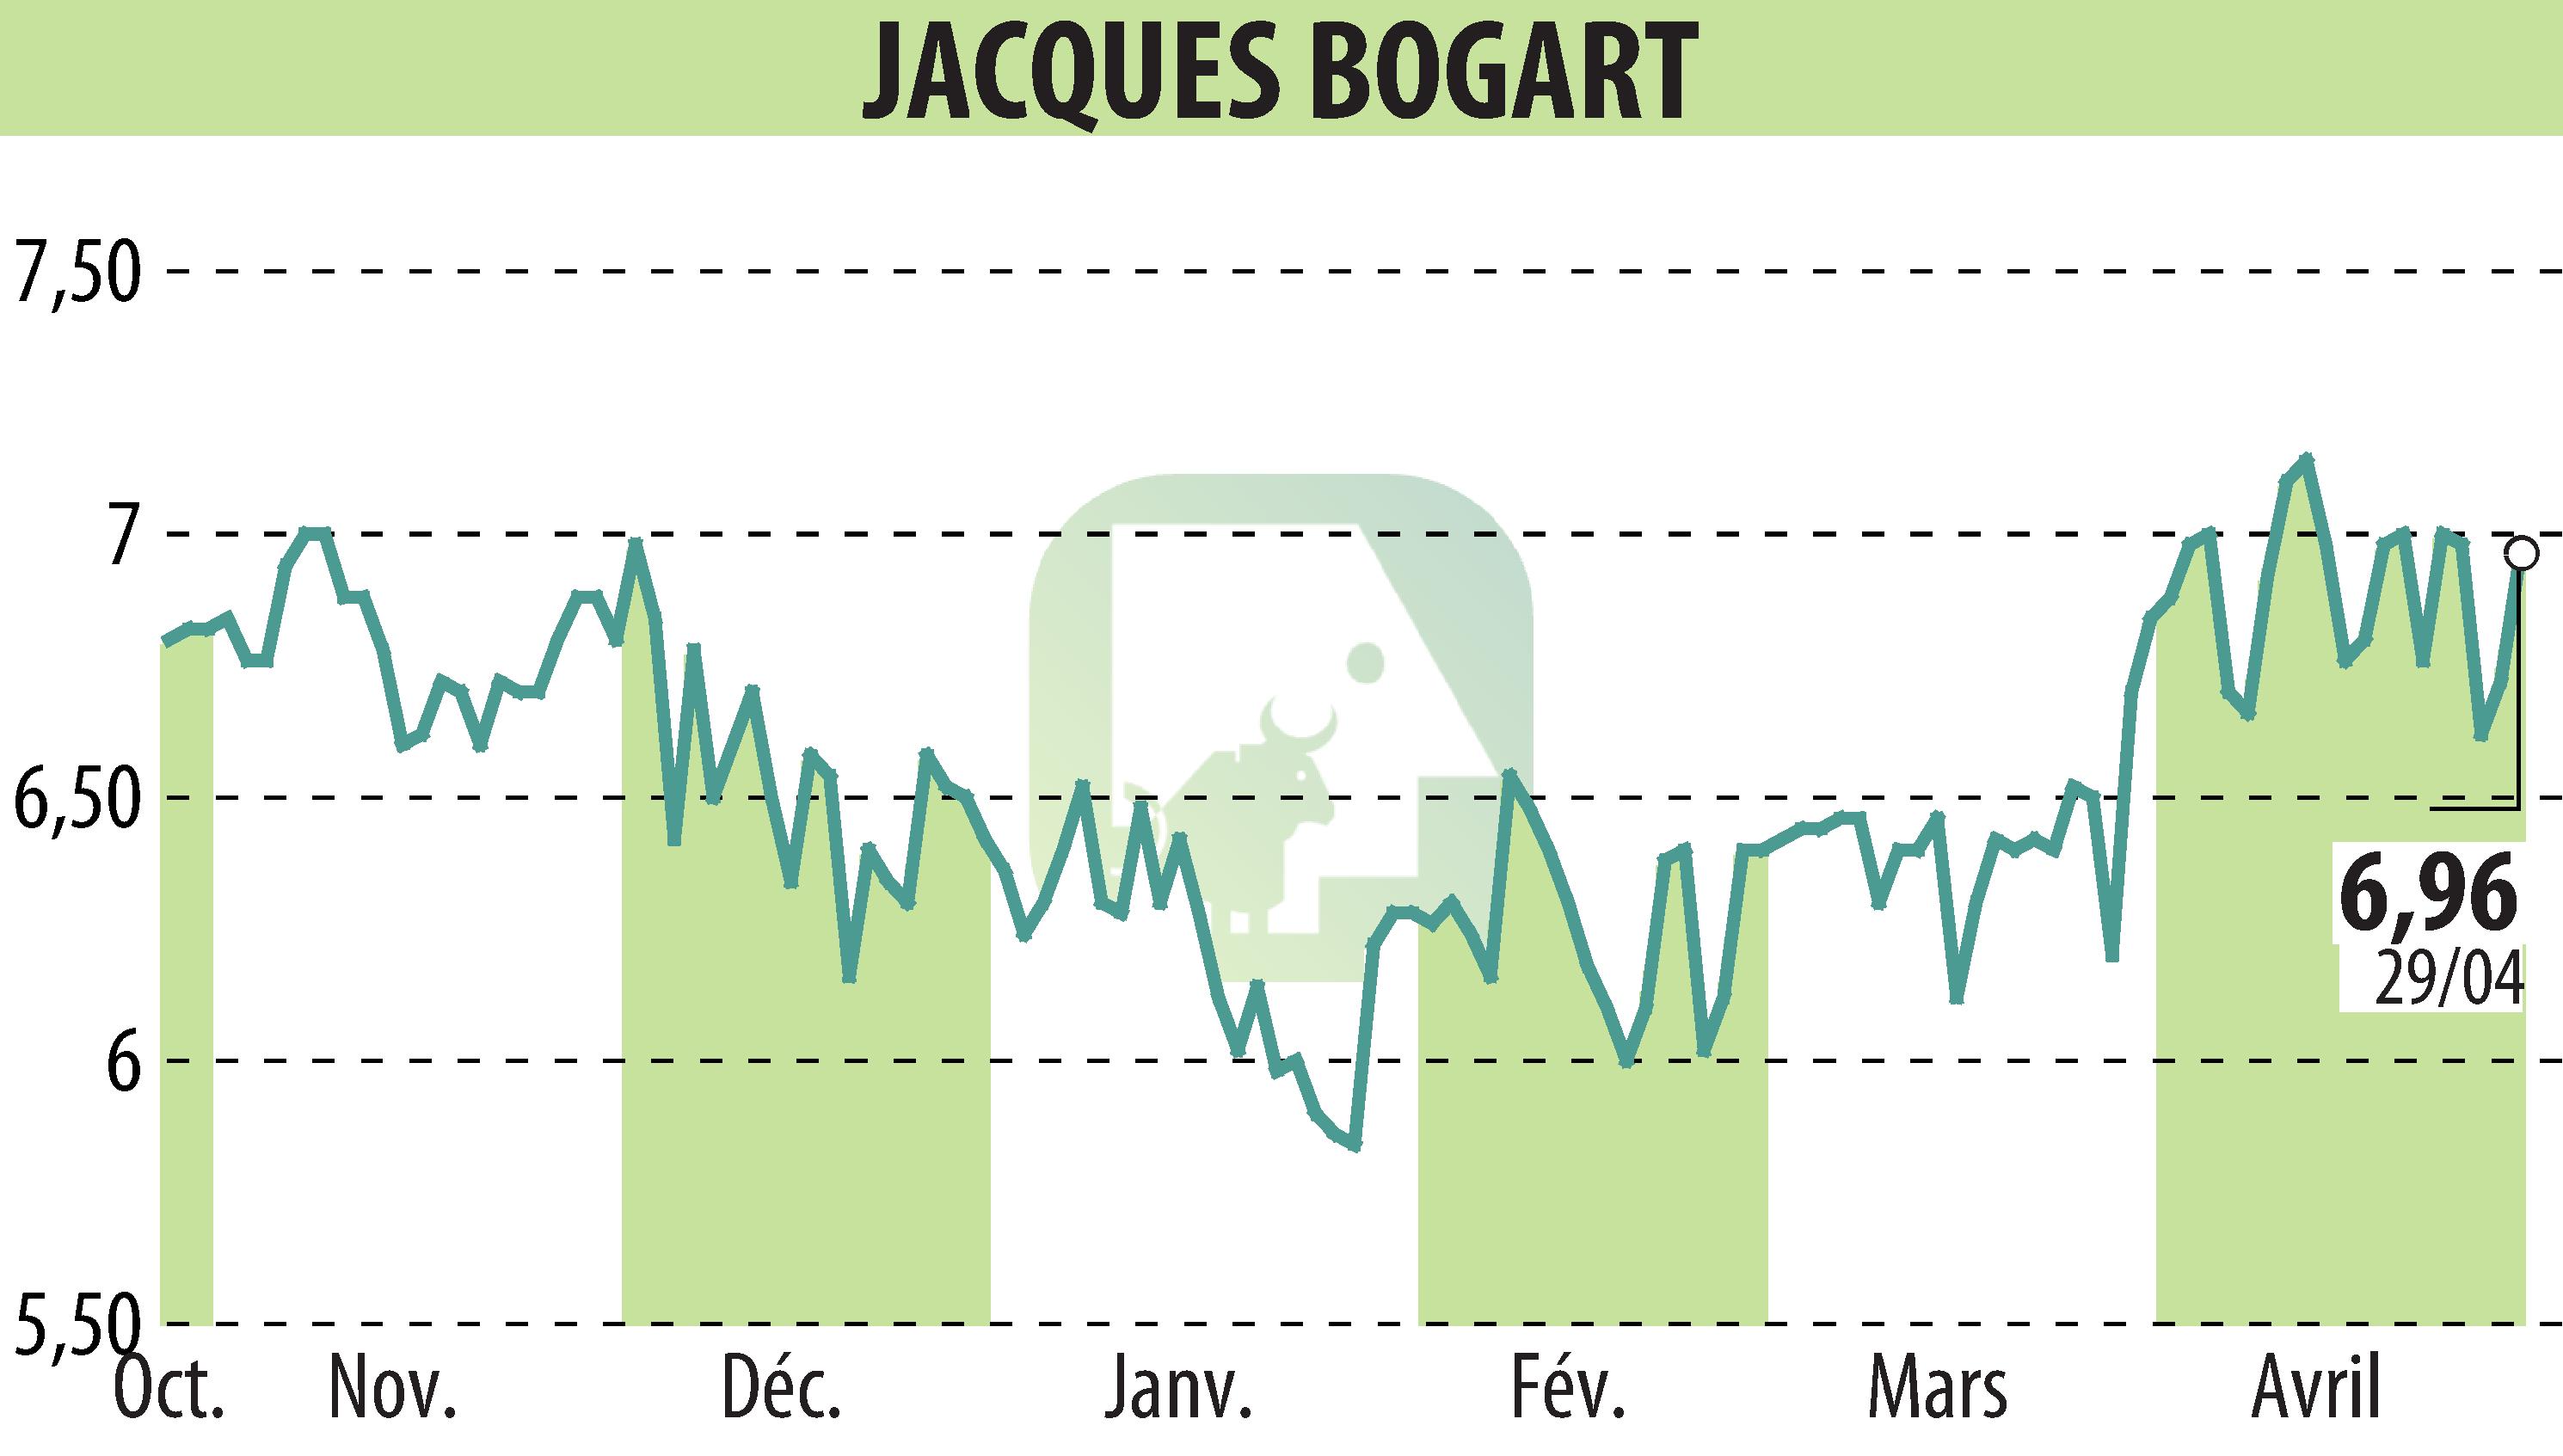 Stock price chart of JACQUES BOGART (EPA:JBOG) showing fluctuations.